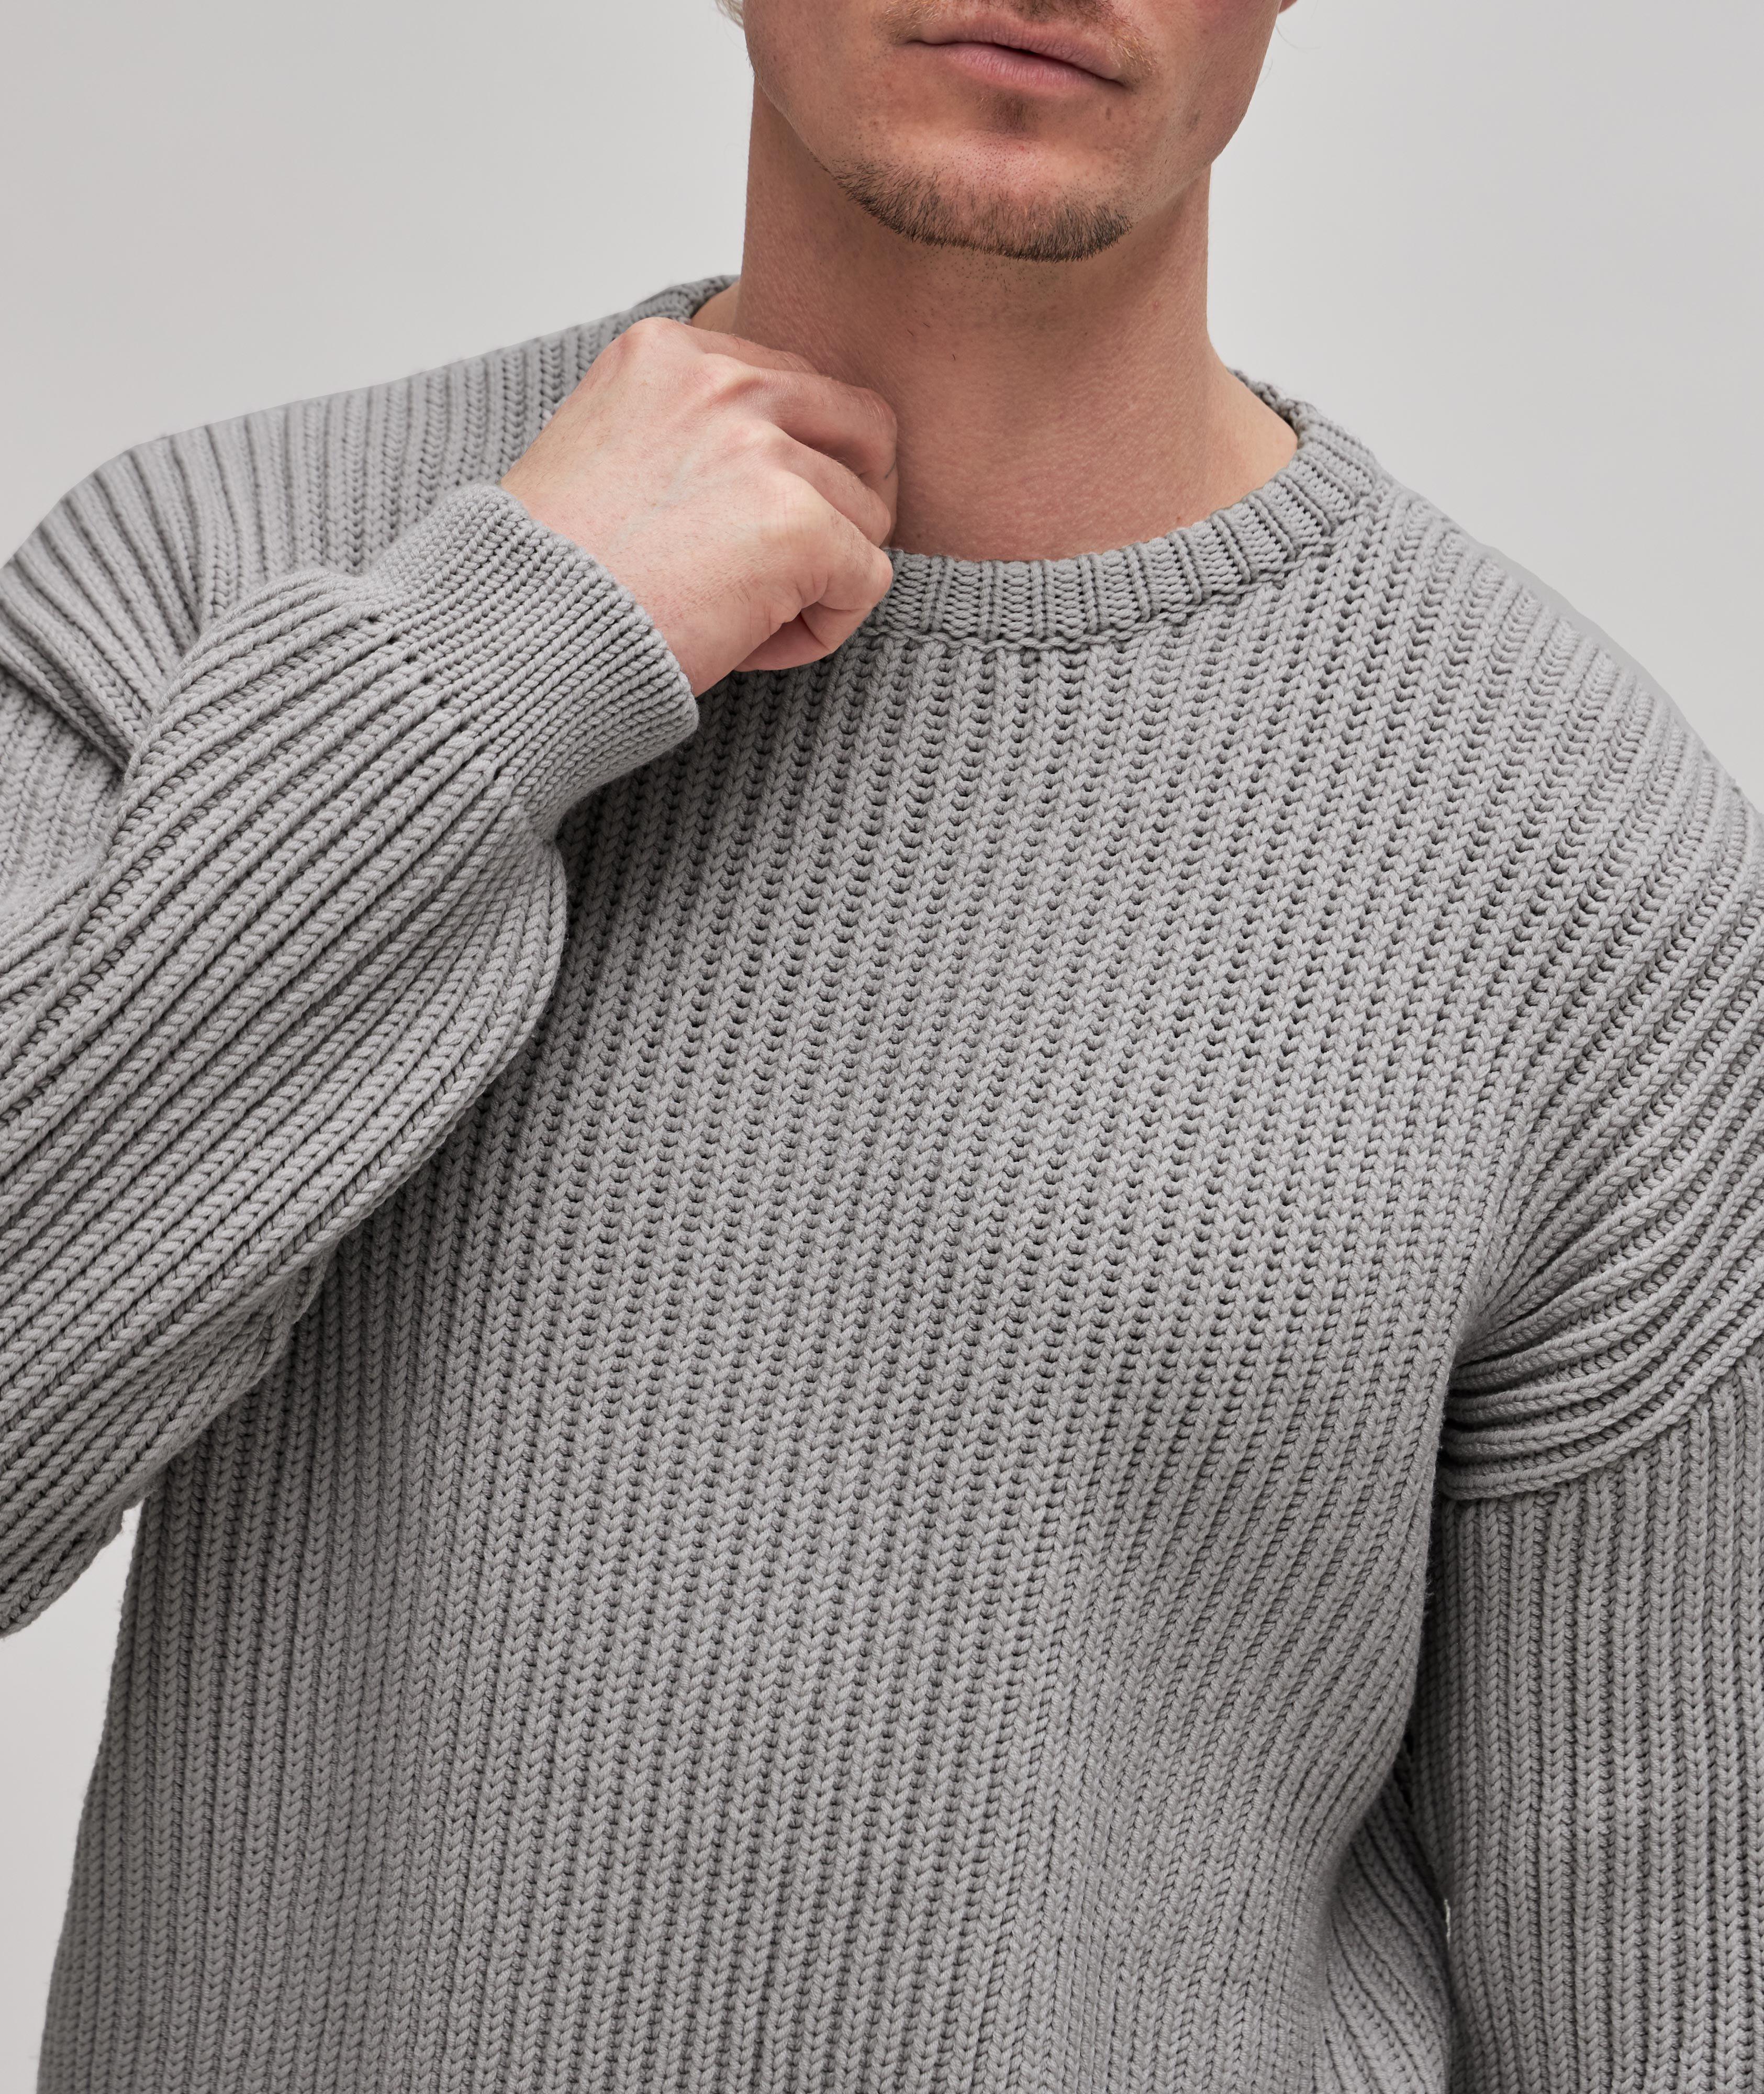 Oasis rib shoulder crew neck sweater in gray